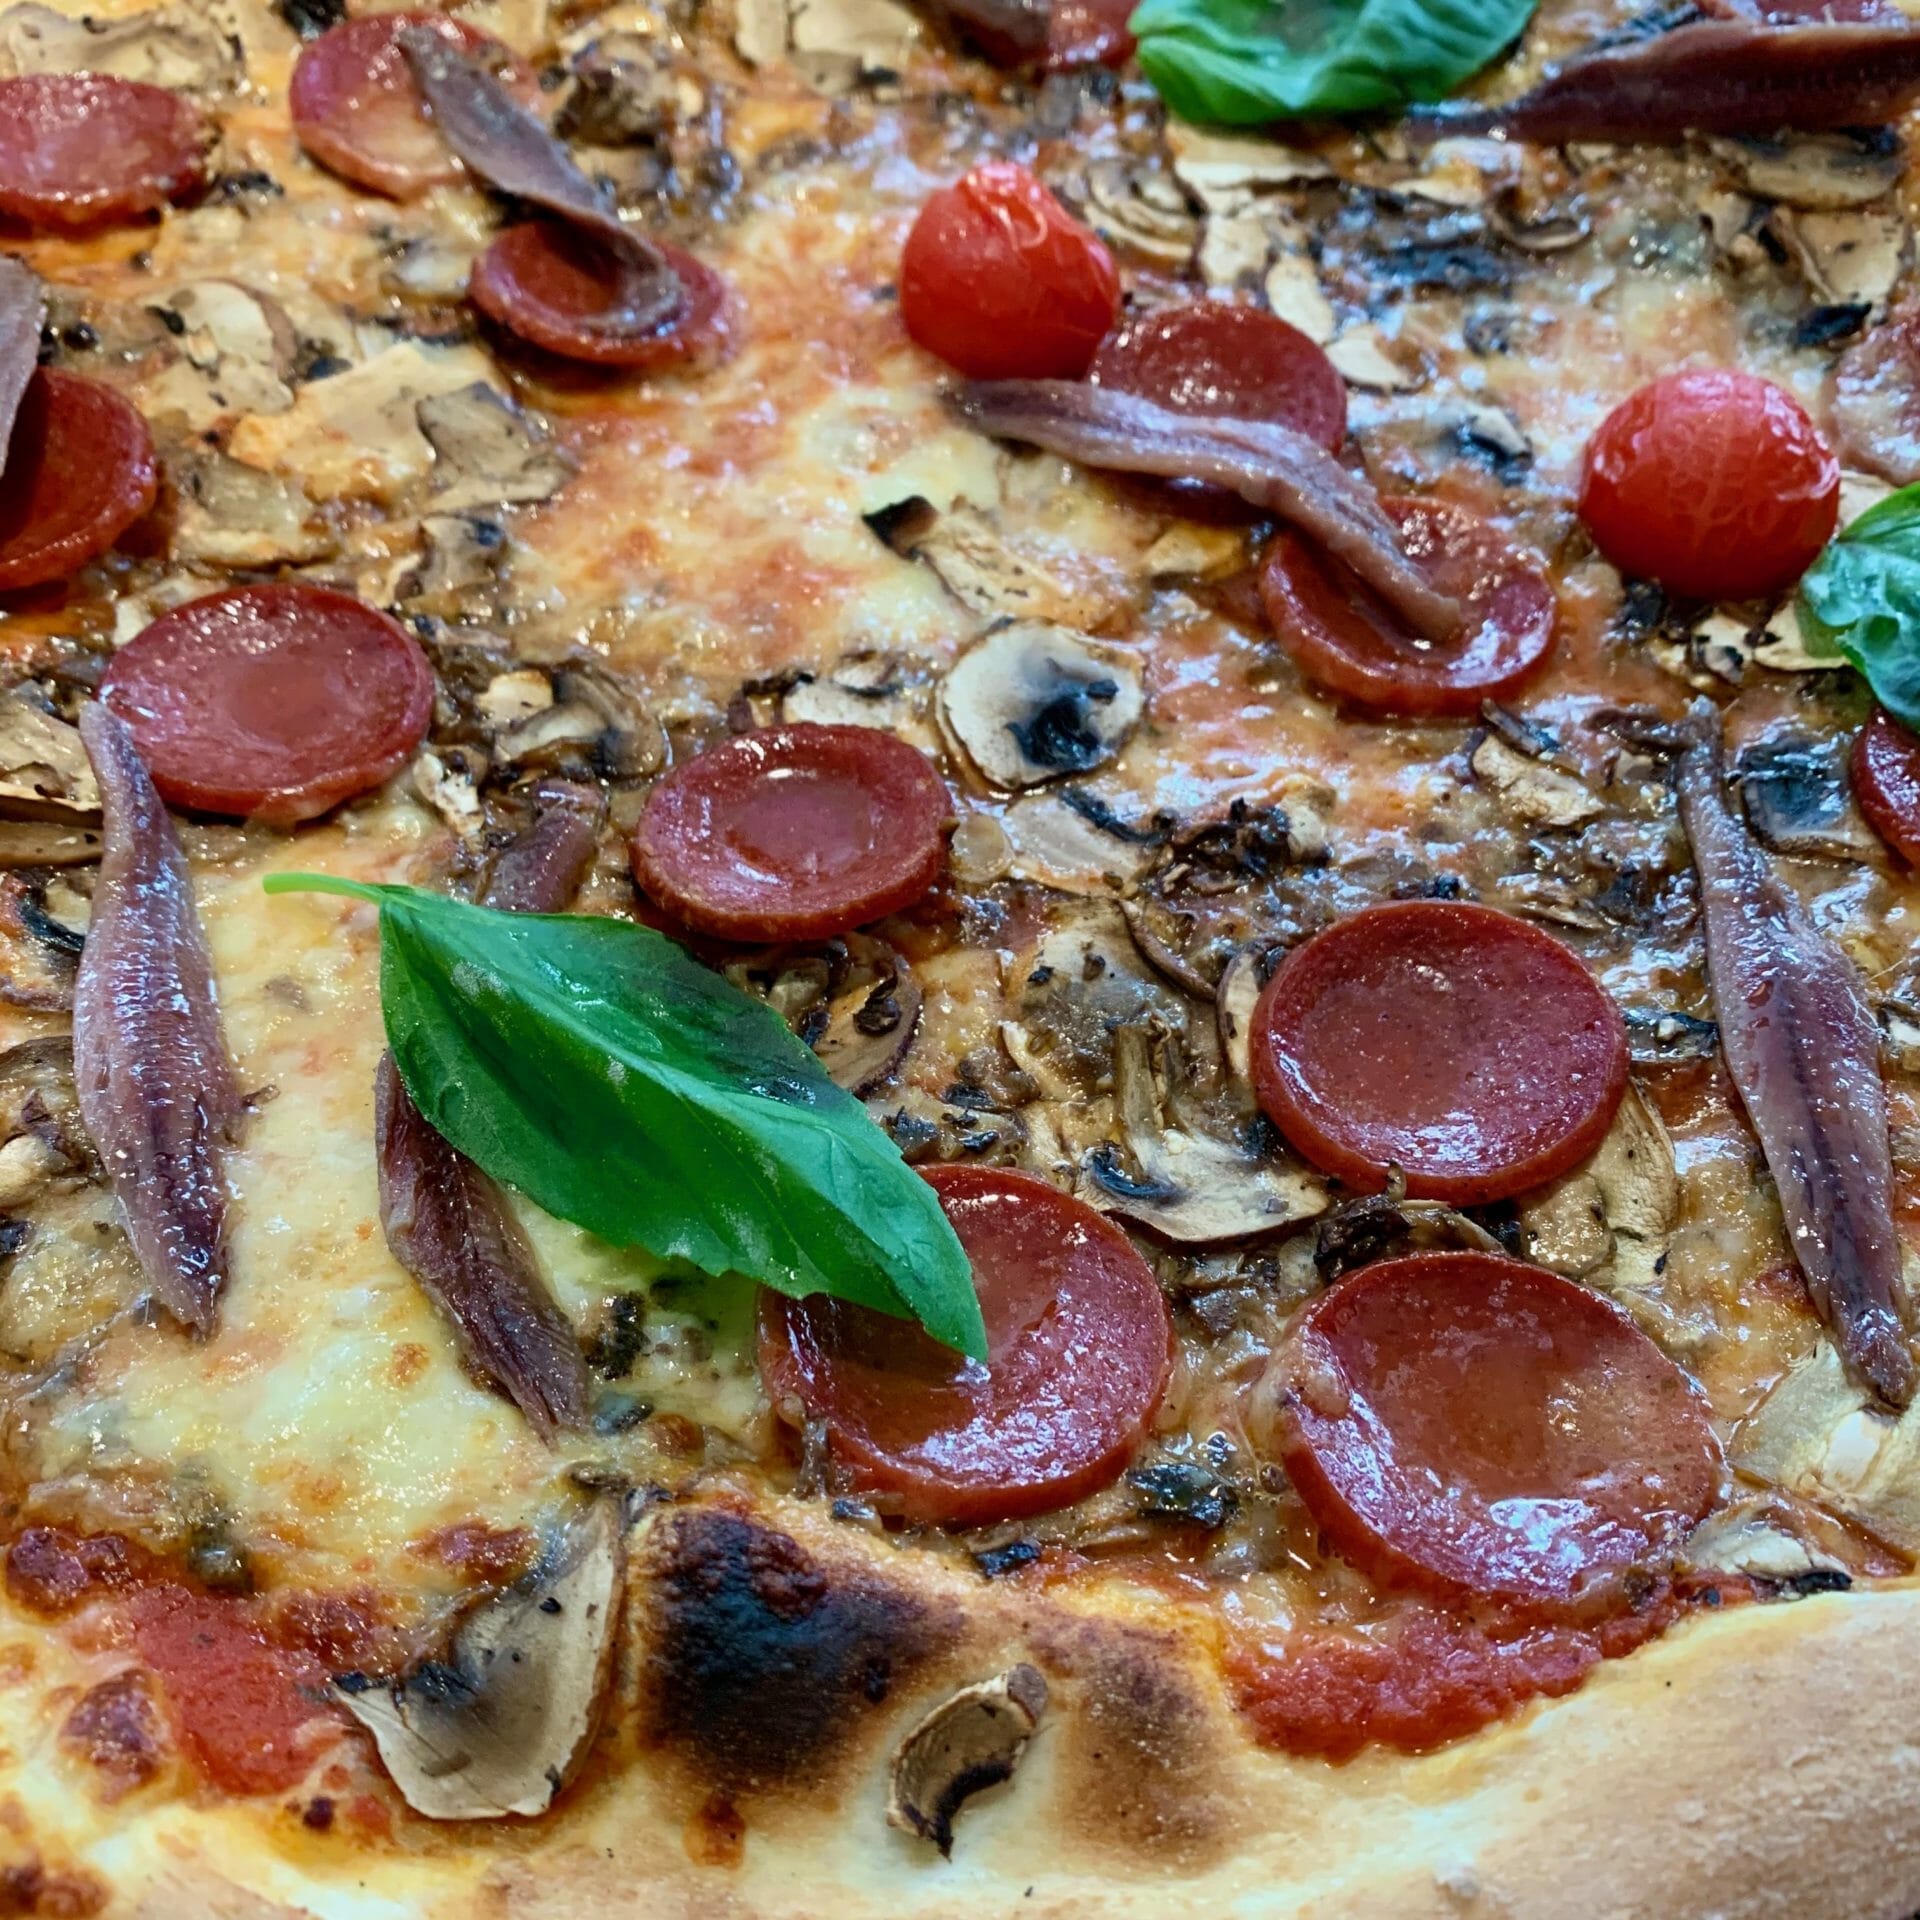 Classic pizza with gluten and everything else you shouldn't have (on a regular basis)